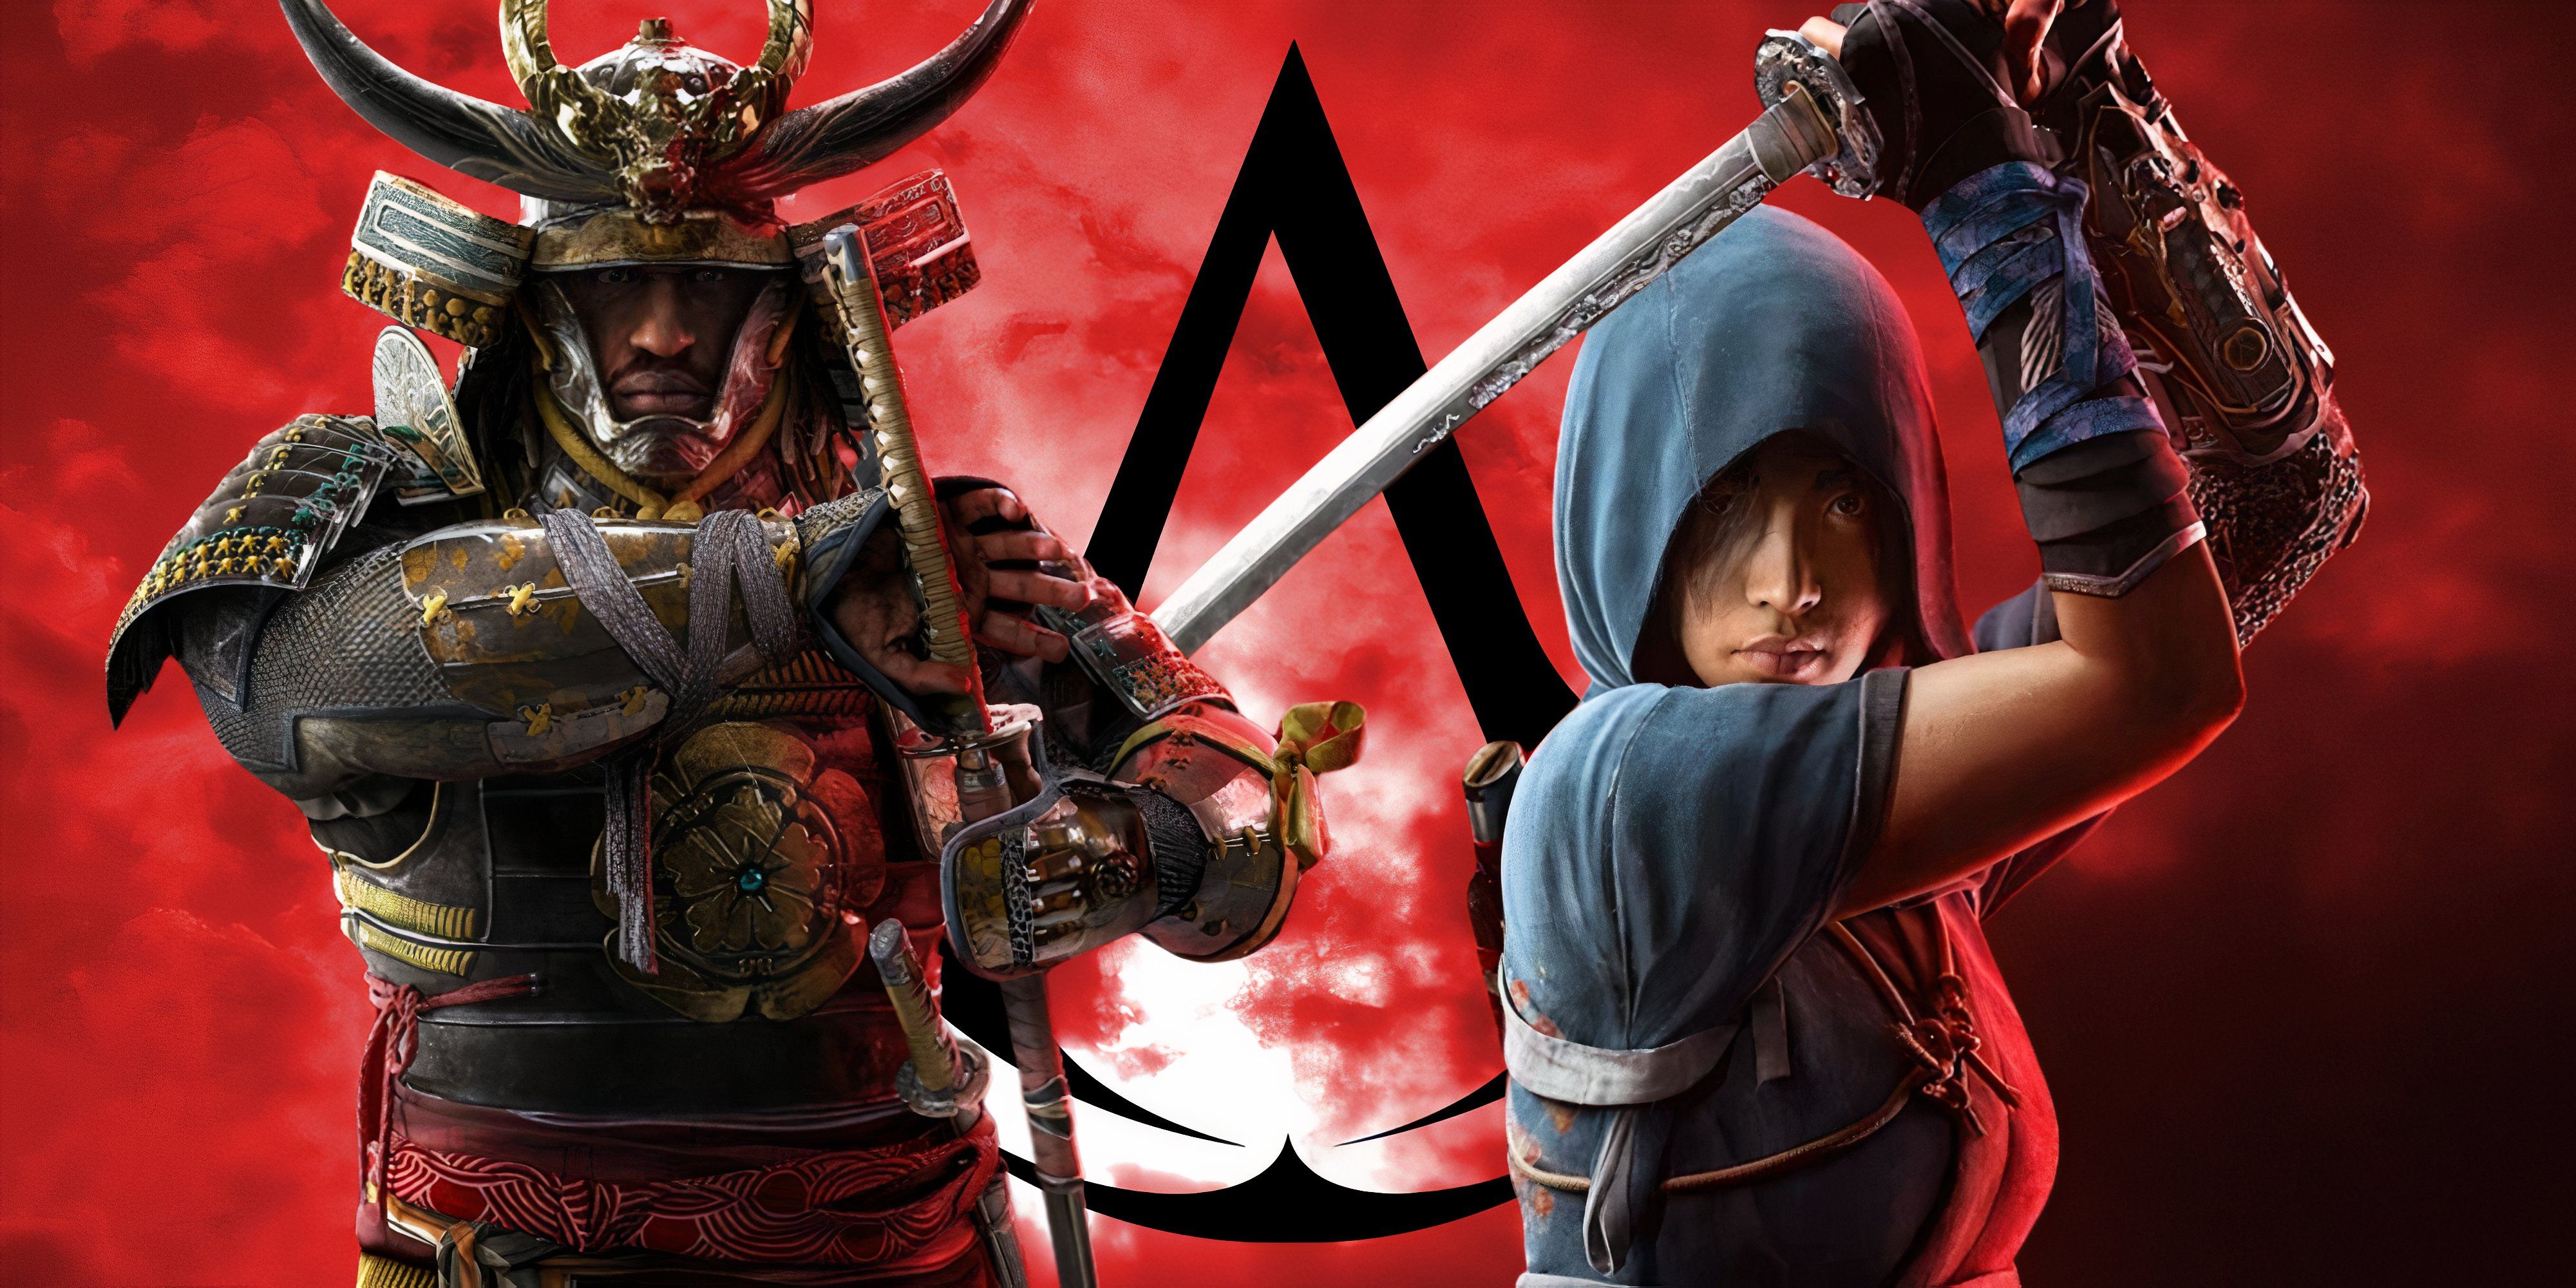 Yasuke and Naoe in front of Assassin's Creed logo